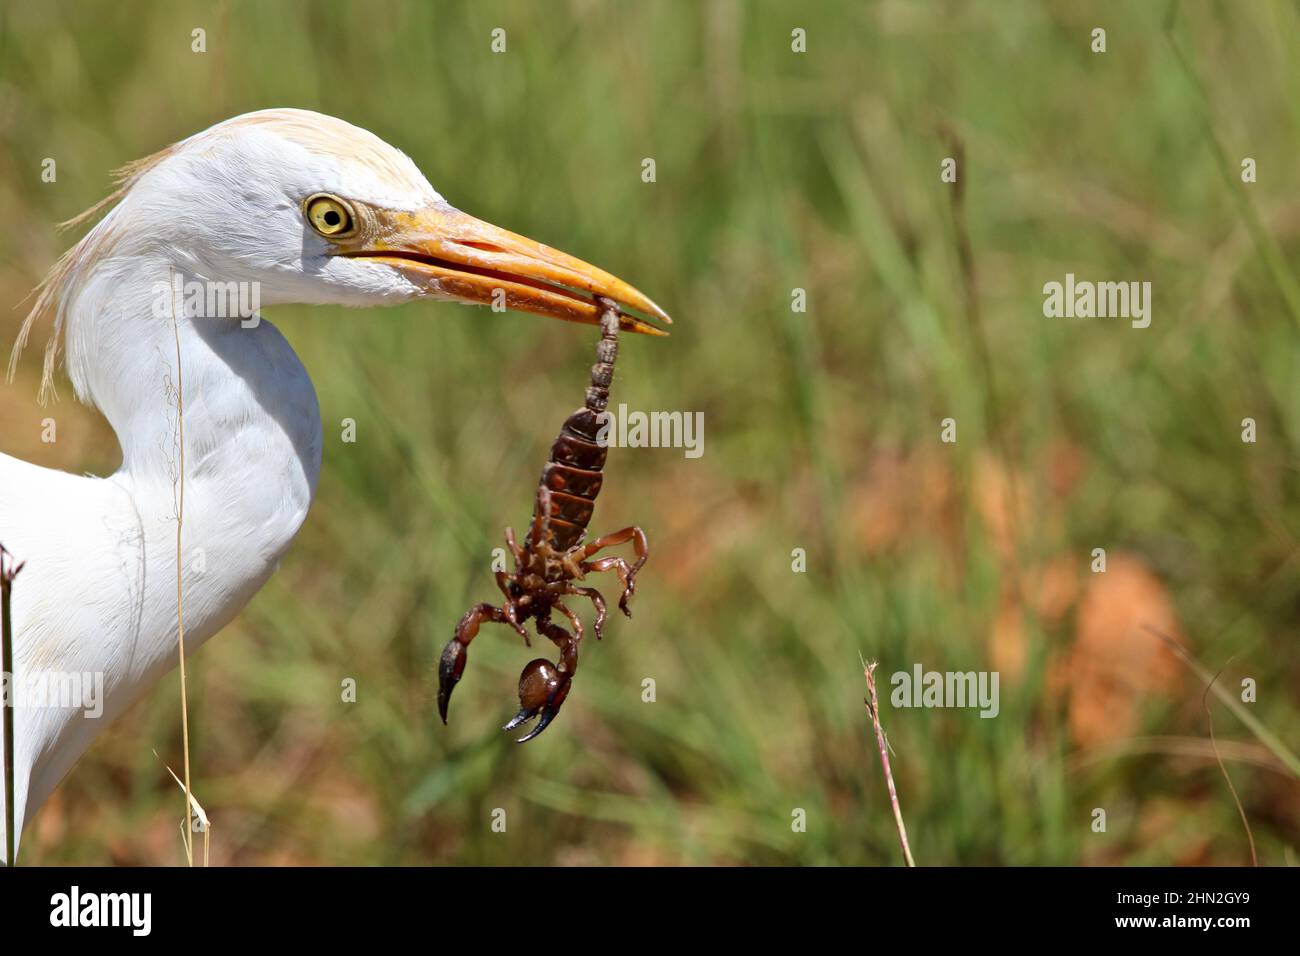 Western Cattle Egret and Pugnacious Burrowing Scorpion, South Africa Stock Photo